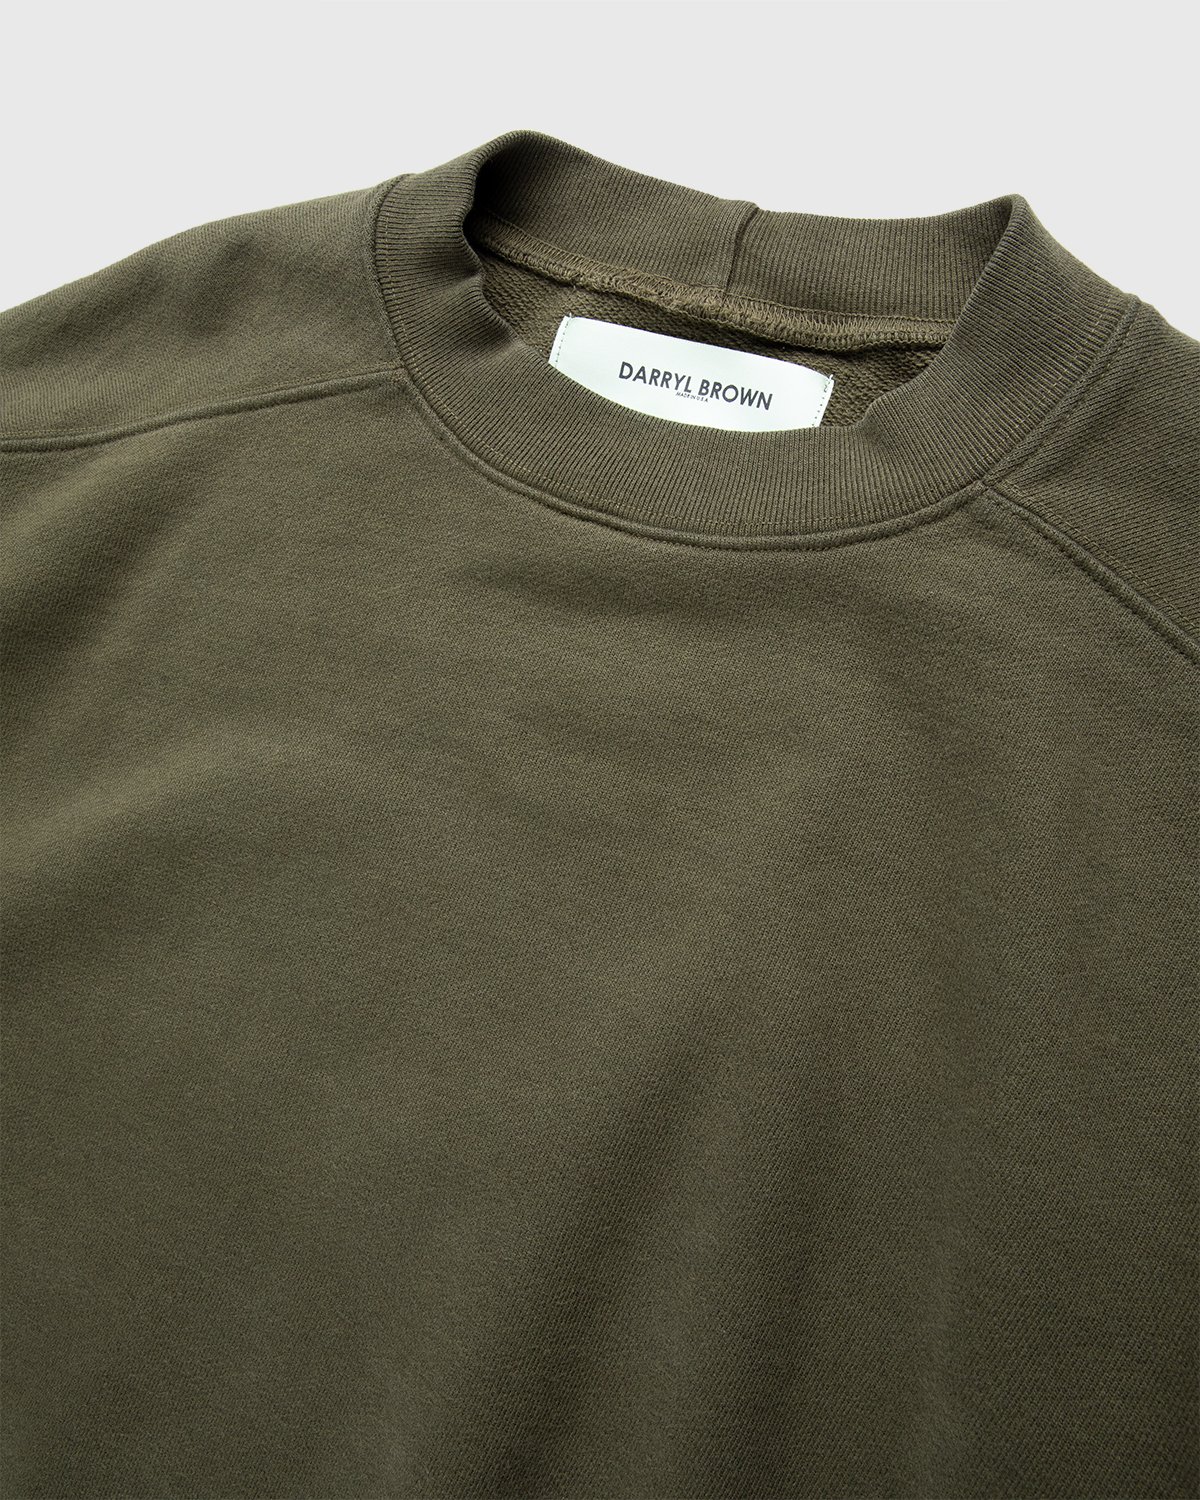 Darryl Brown - Crew Military Olive - Clothing - Green - Image 3